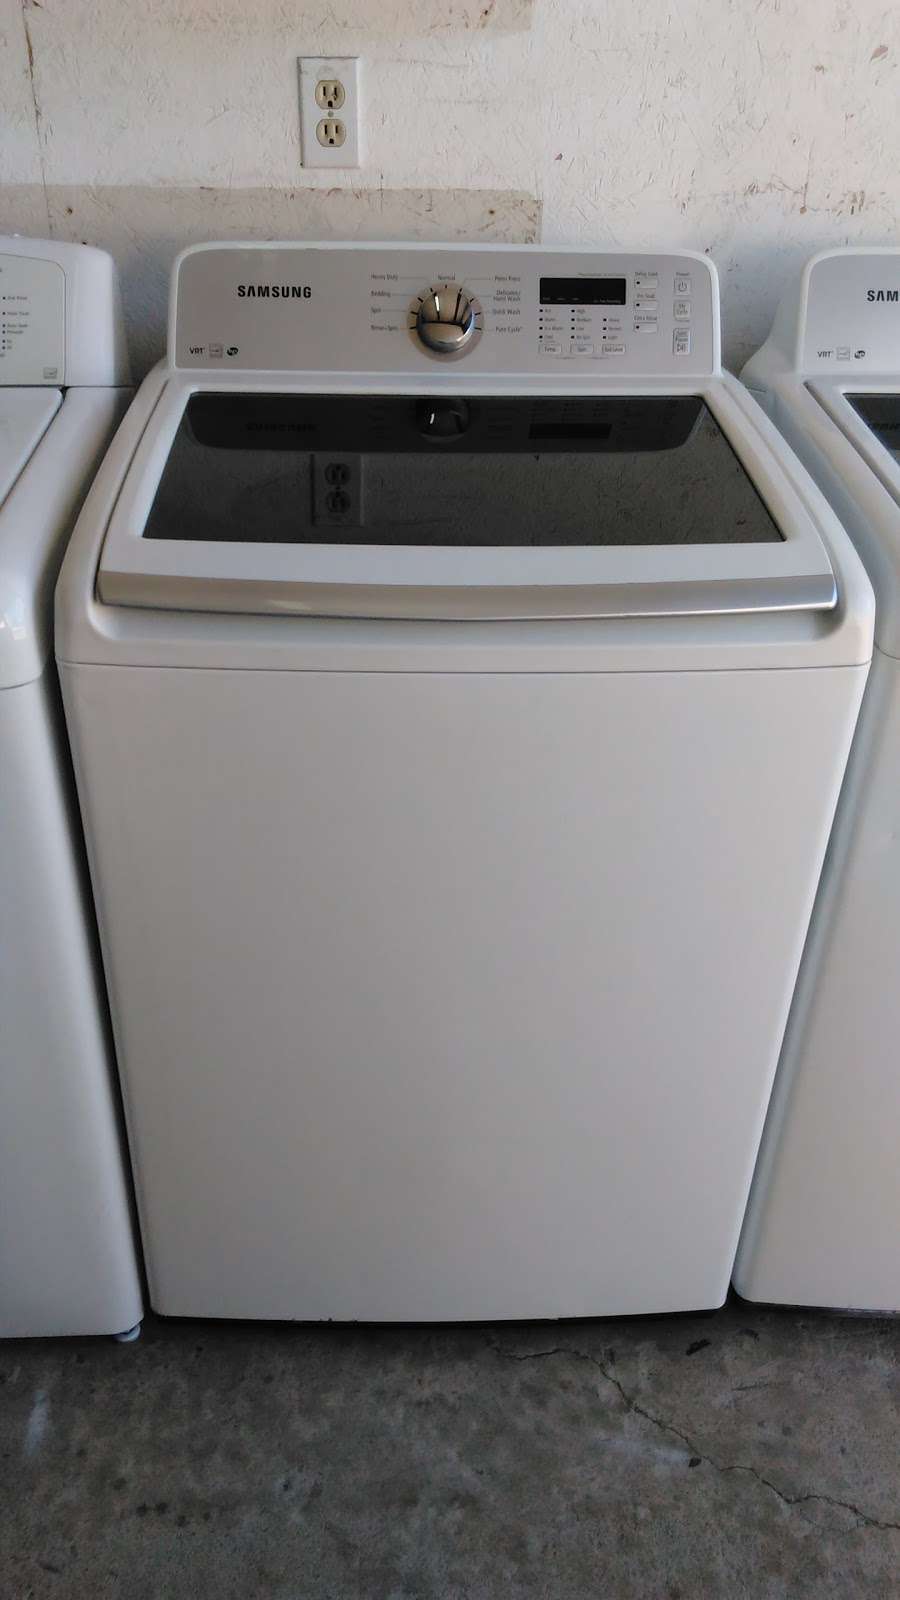 Quality Used Appliances | Photo 2 of 10 | Address: 7590 E Hwy 25, Belleview, FL 34420, USA | Phone: (352) 434-2204